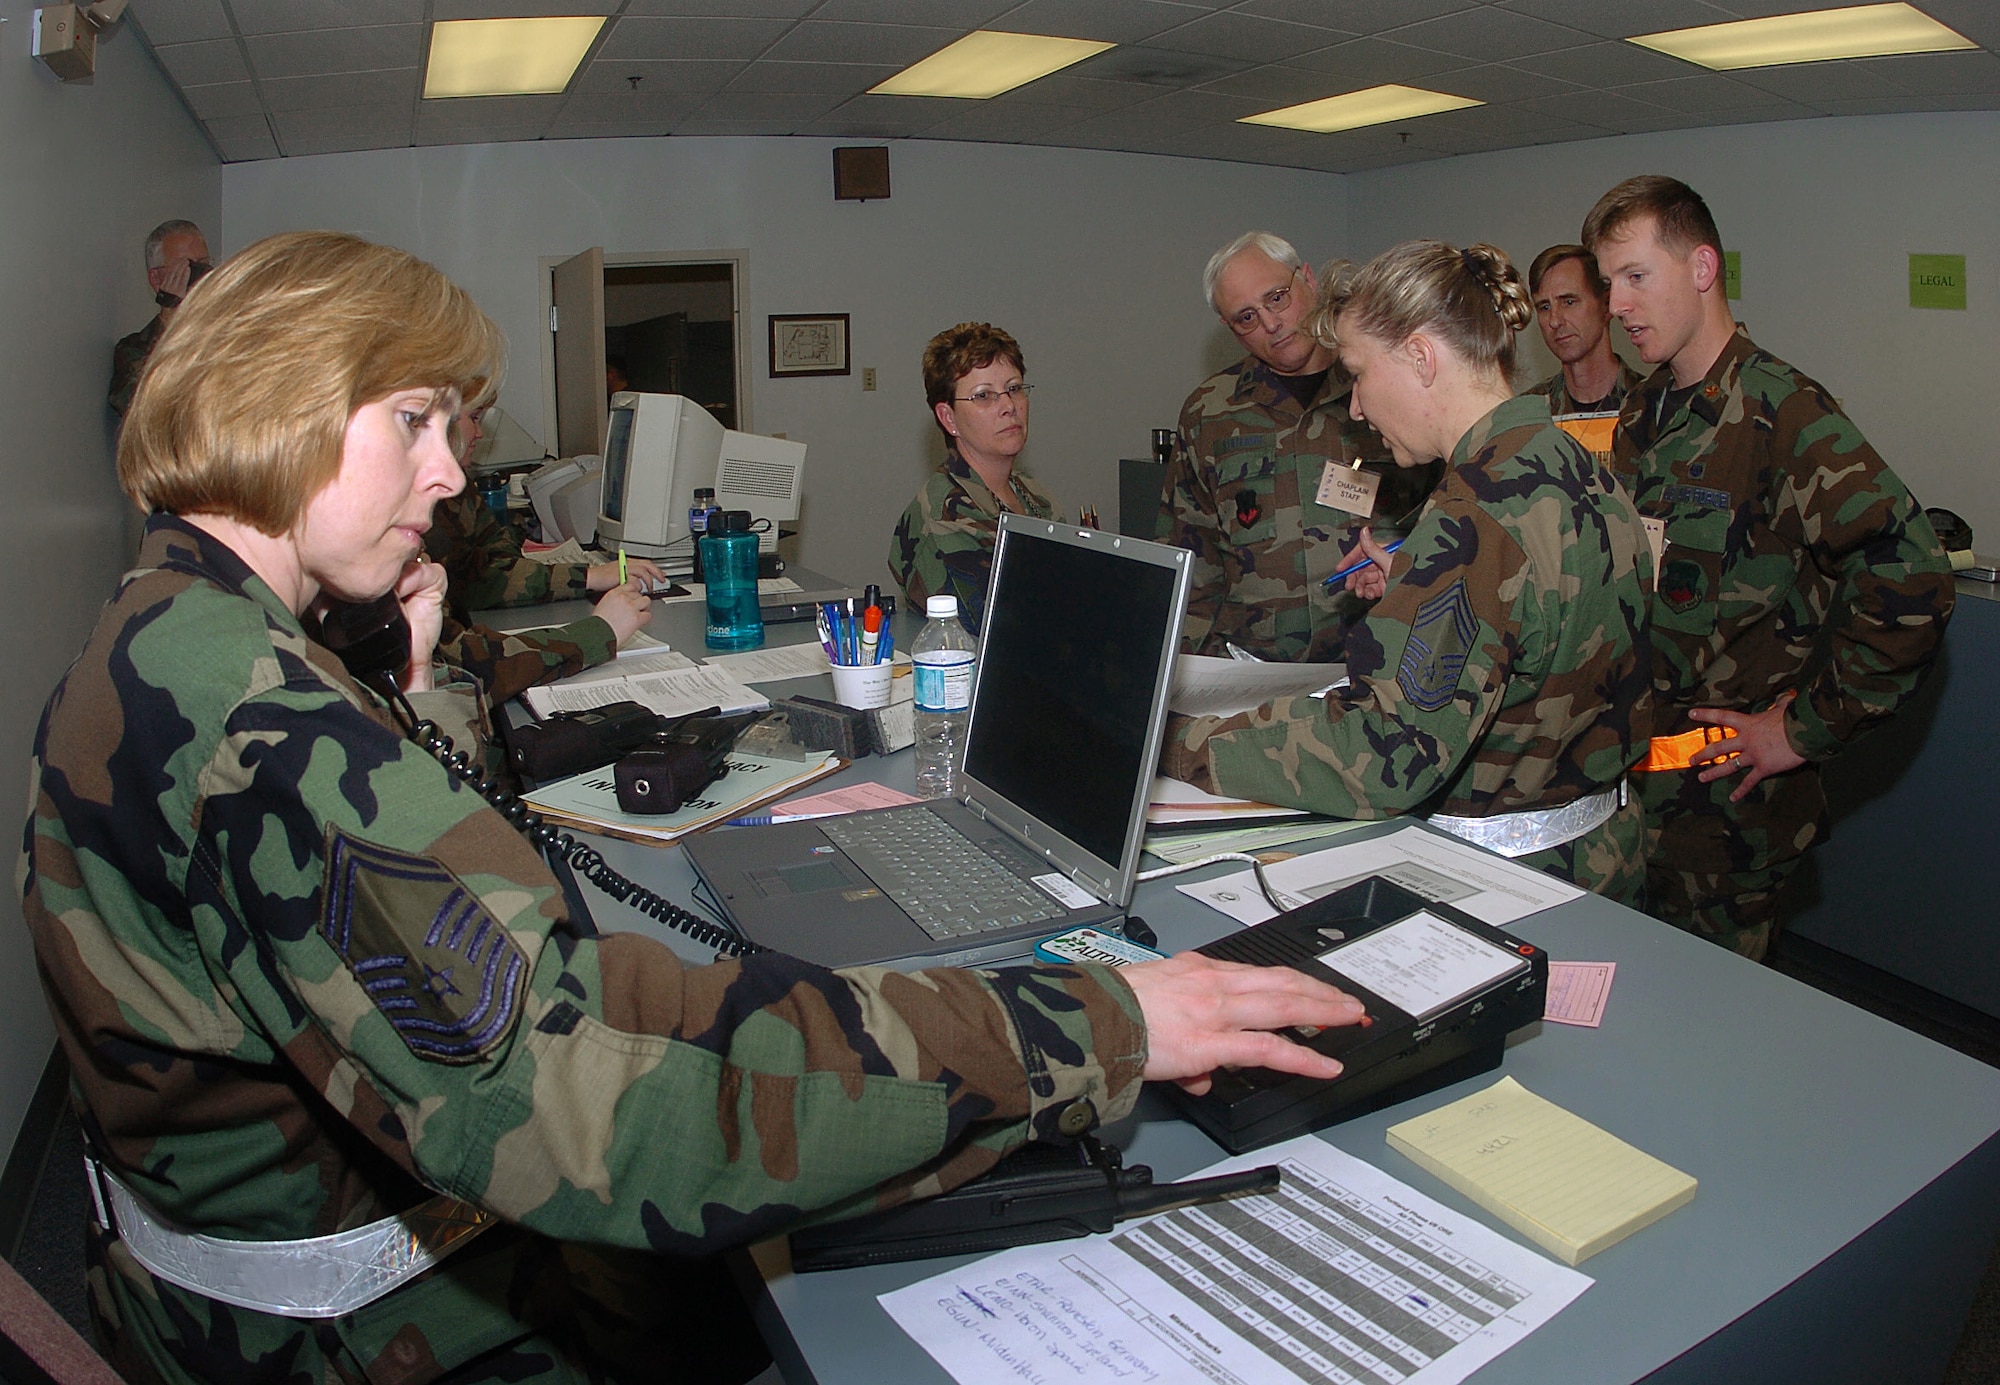 Senior Master Sgt. Jean Allen, assigned to the 142nd Fighter Wing Mission Support Group, left, assist in processing unit personnel during an Operational Readiness Exercise, June 4, 2006, Portland Air National Guard Base, Ore.  Allen retired with more than 32 years of service on Dec. 22, 2015. (Air National Guard photo by Tech. Sgt. John Hughel, 142nd Fighter Wing Public Affairs)